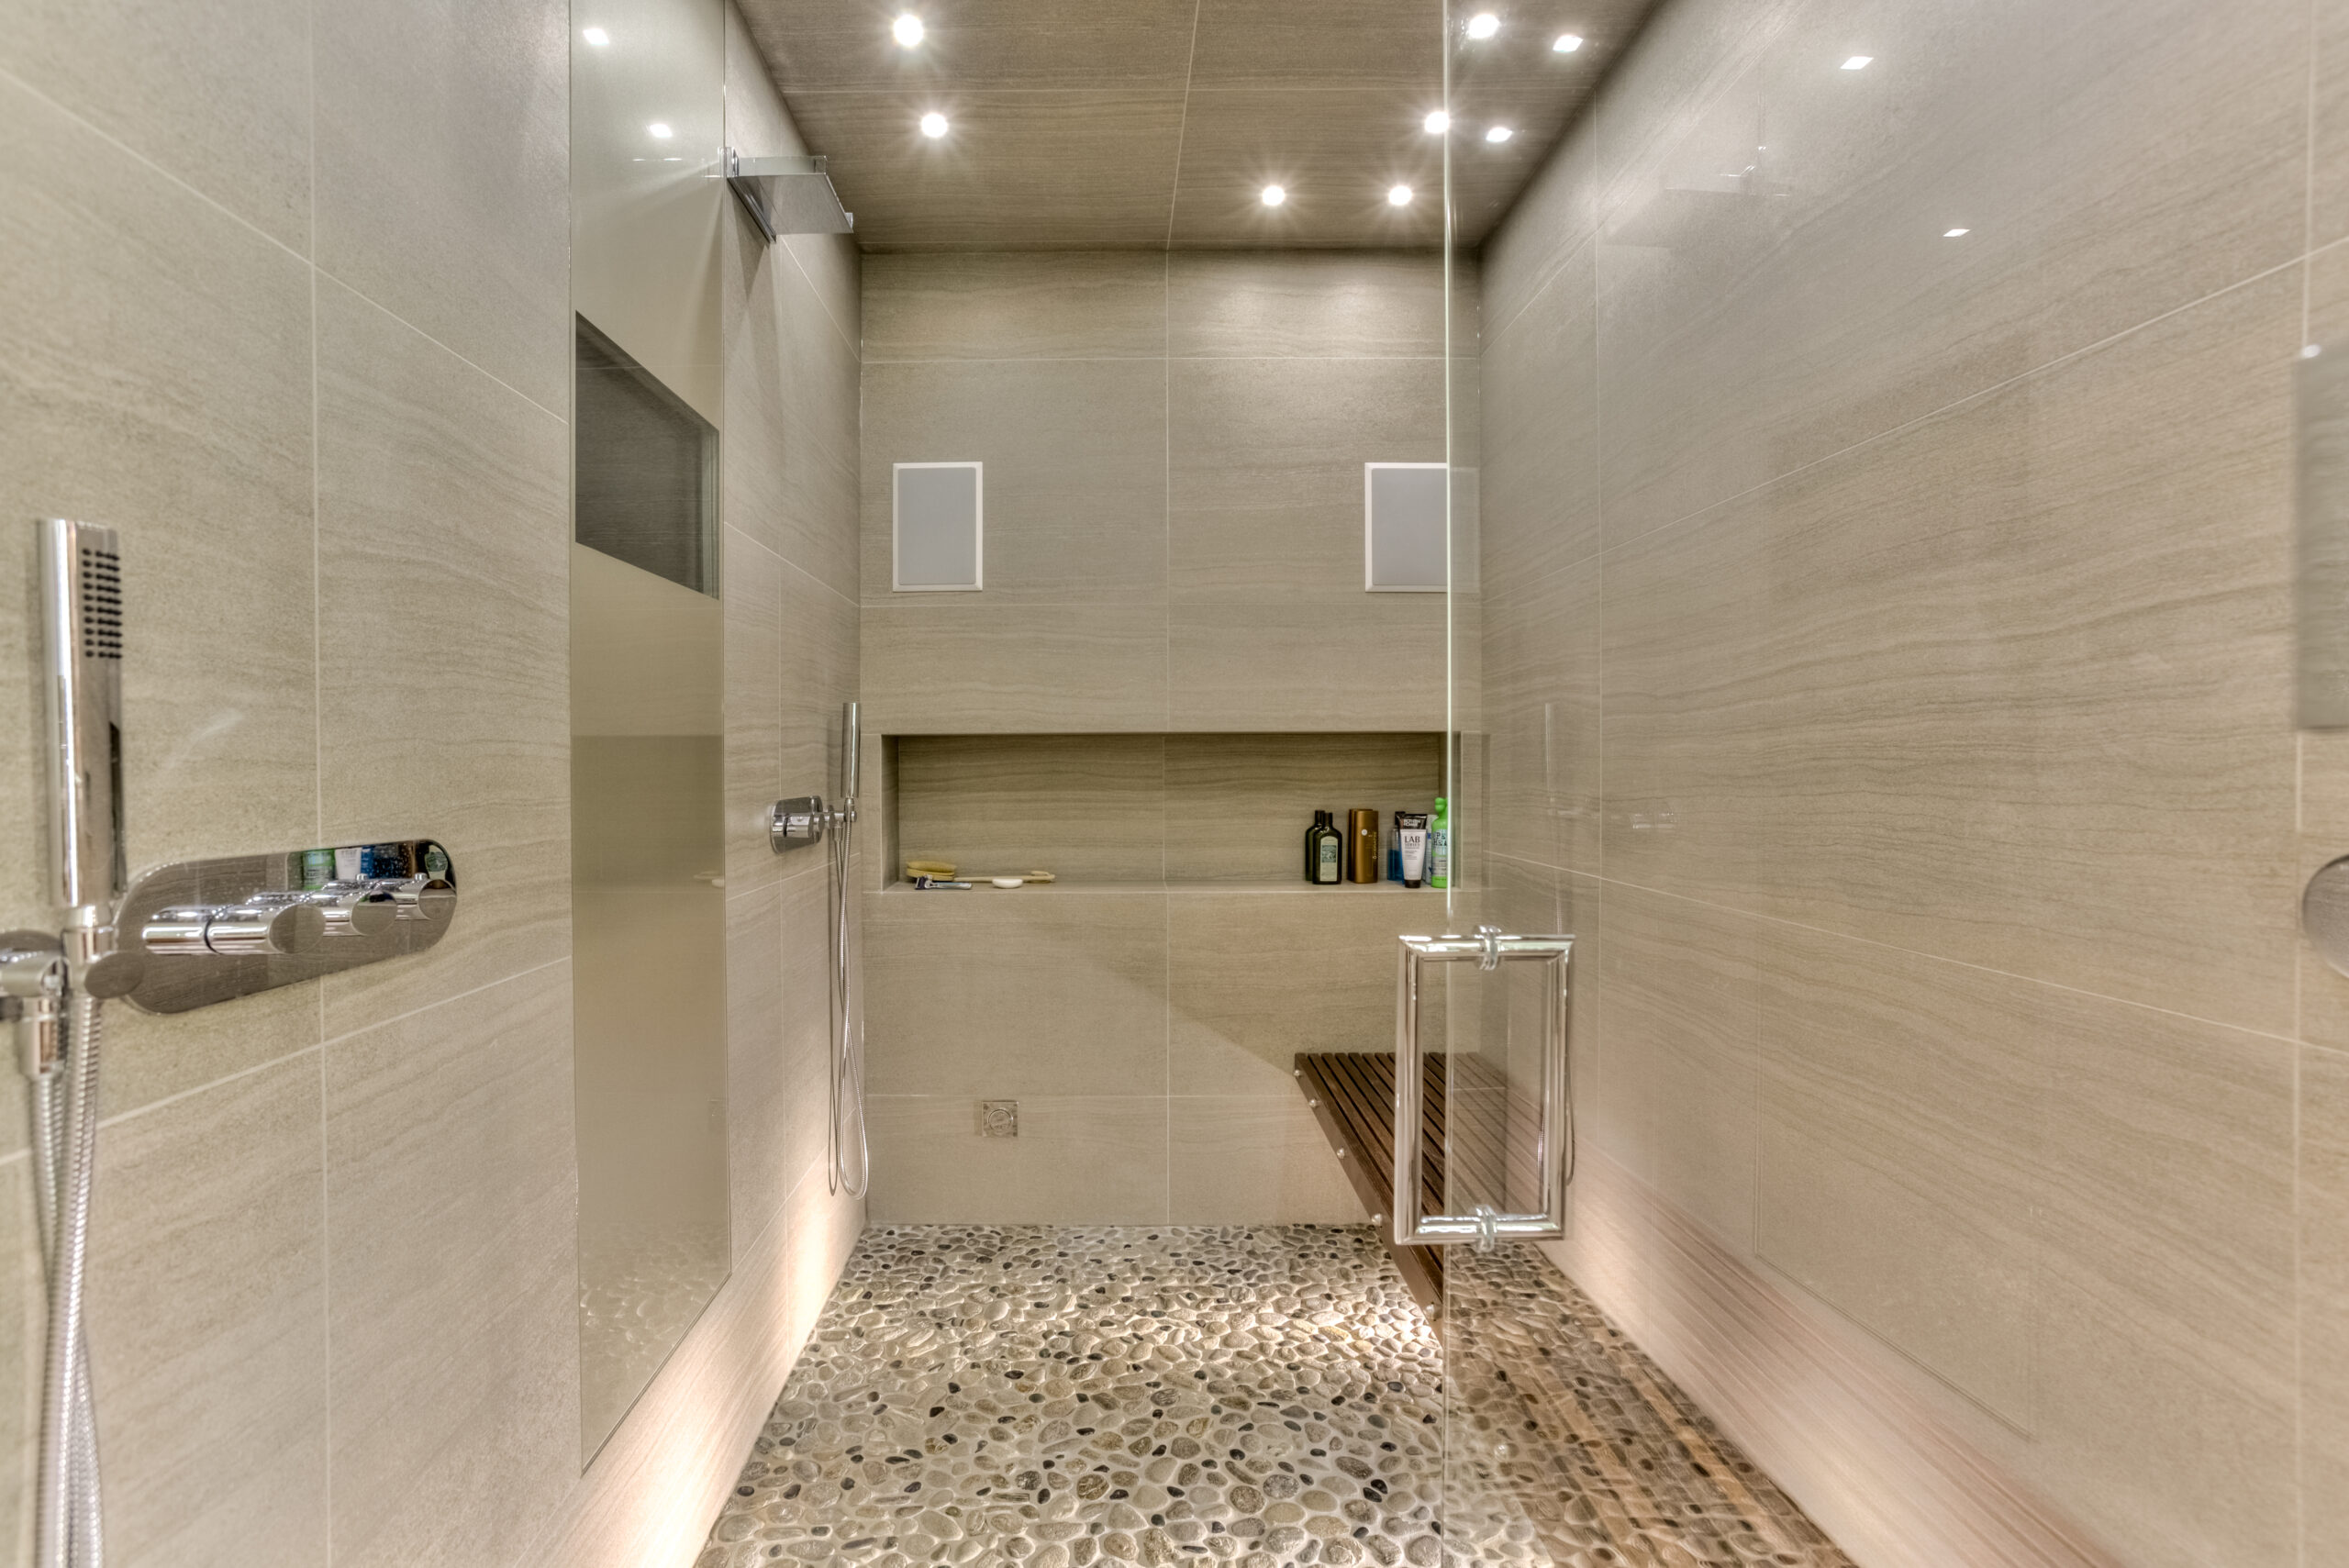 Walk-in shower with automated lights